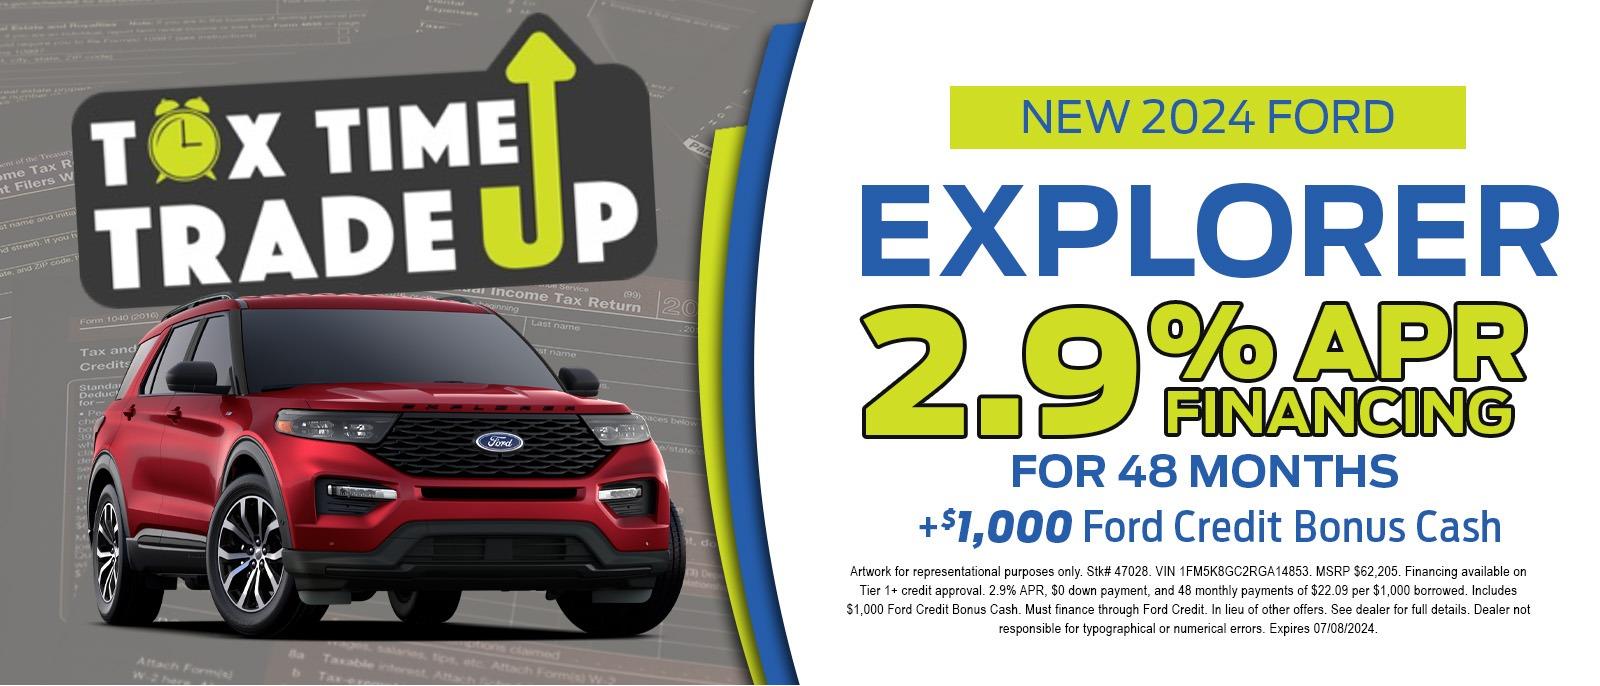 2.9% apr on a new 2024 ford explorer